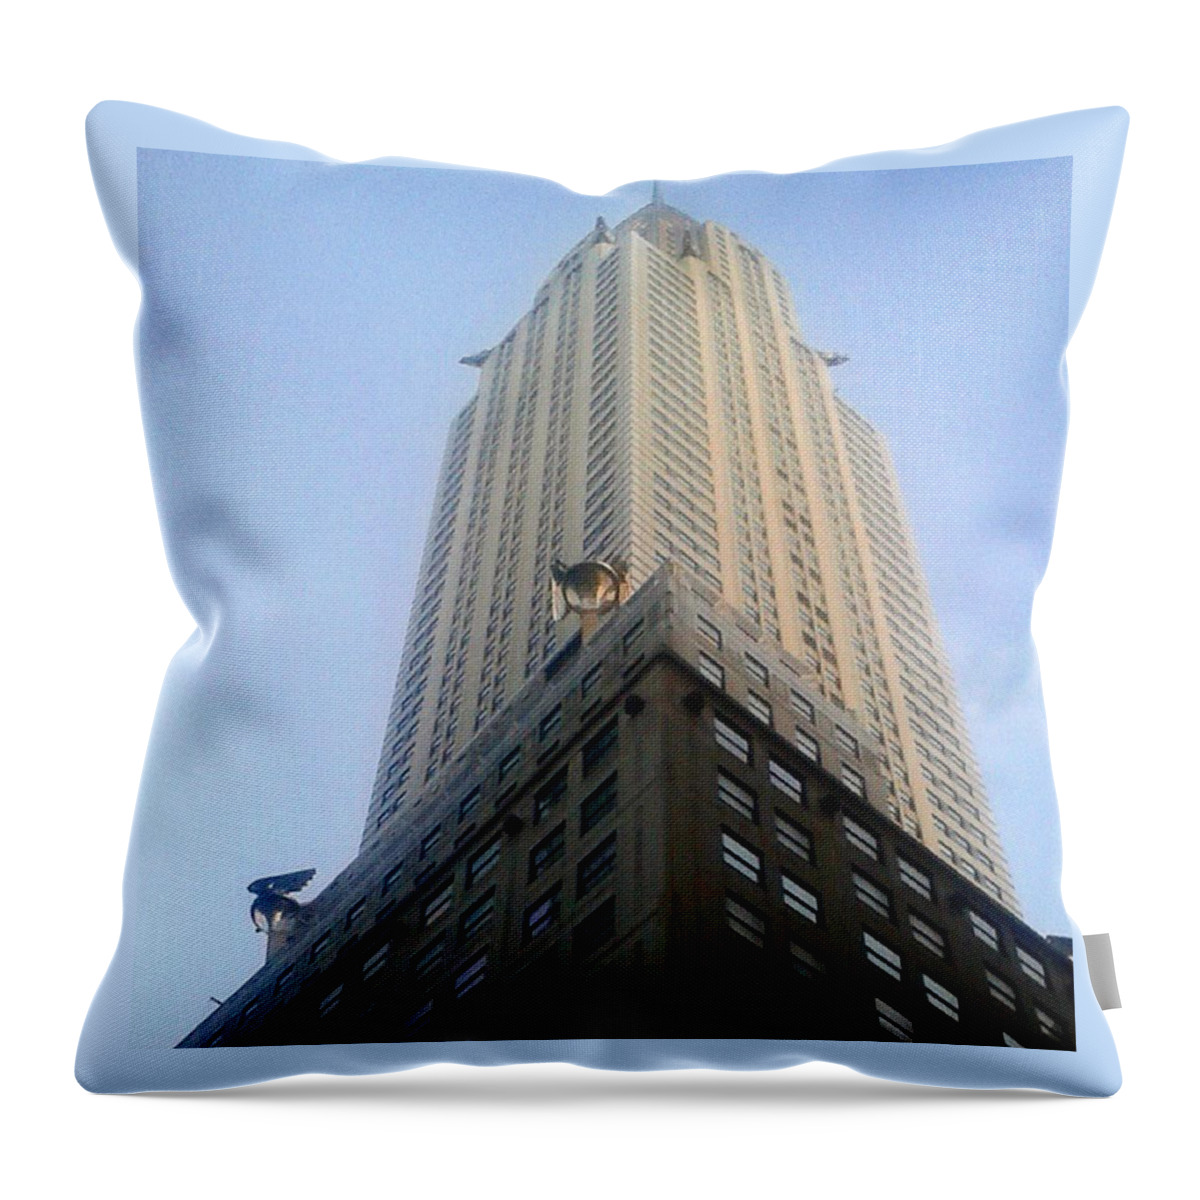 Evening Throw Pillow featuring the photograph Chrysler Building NYC by Christopher M Moll